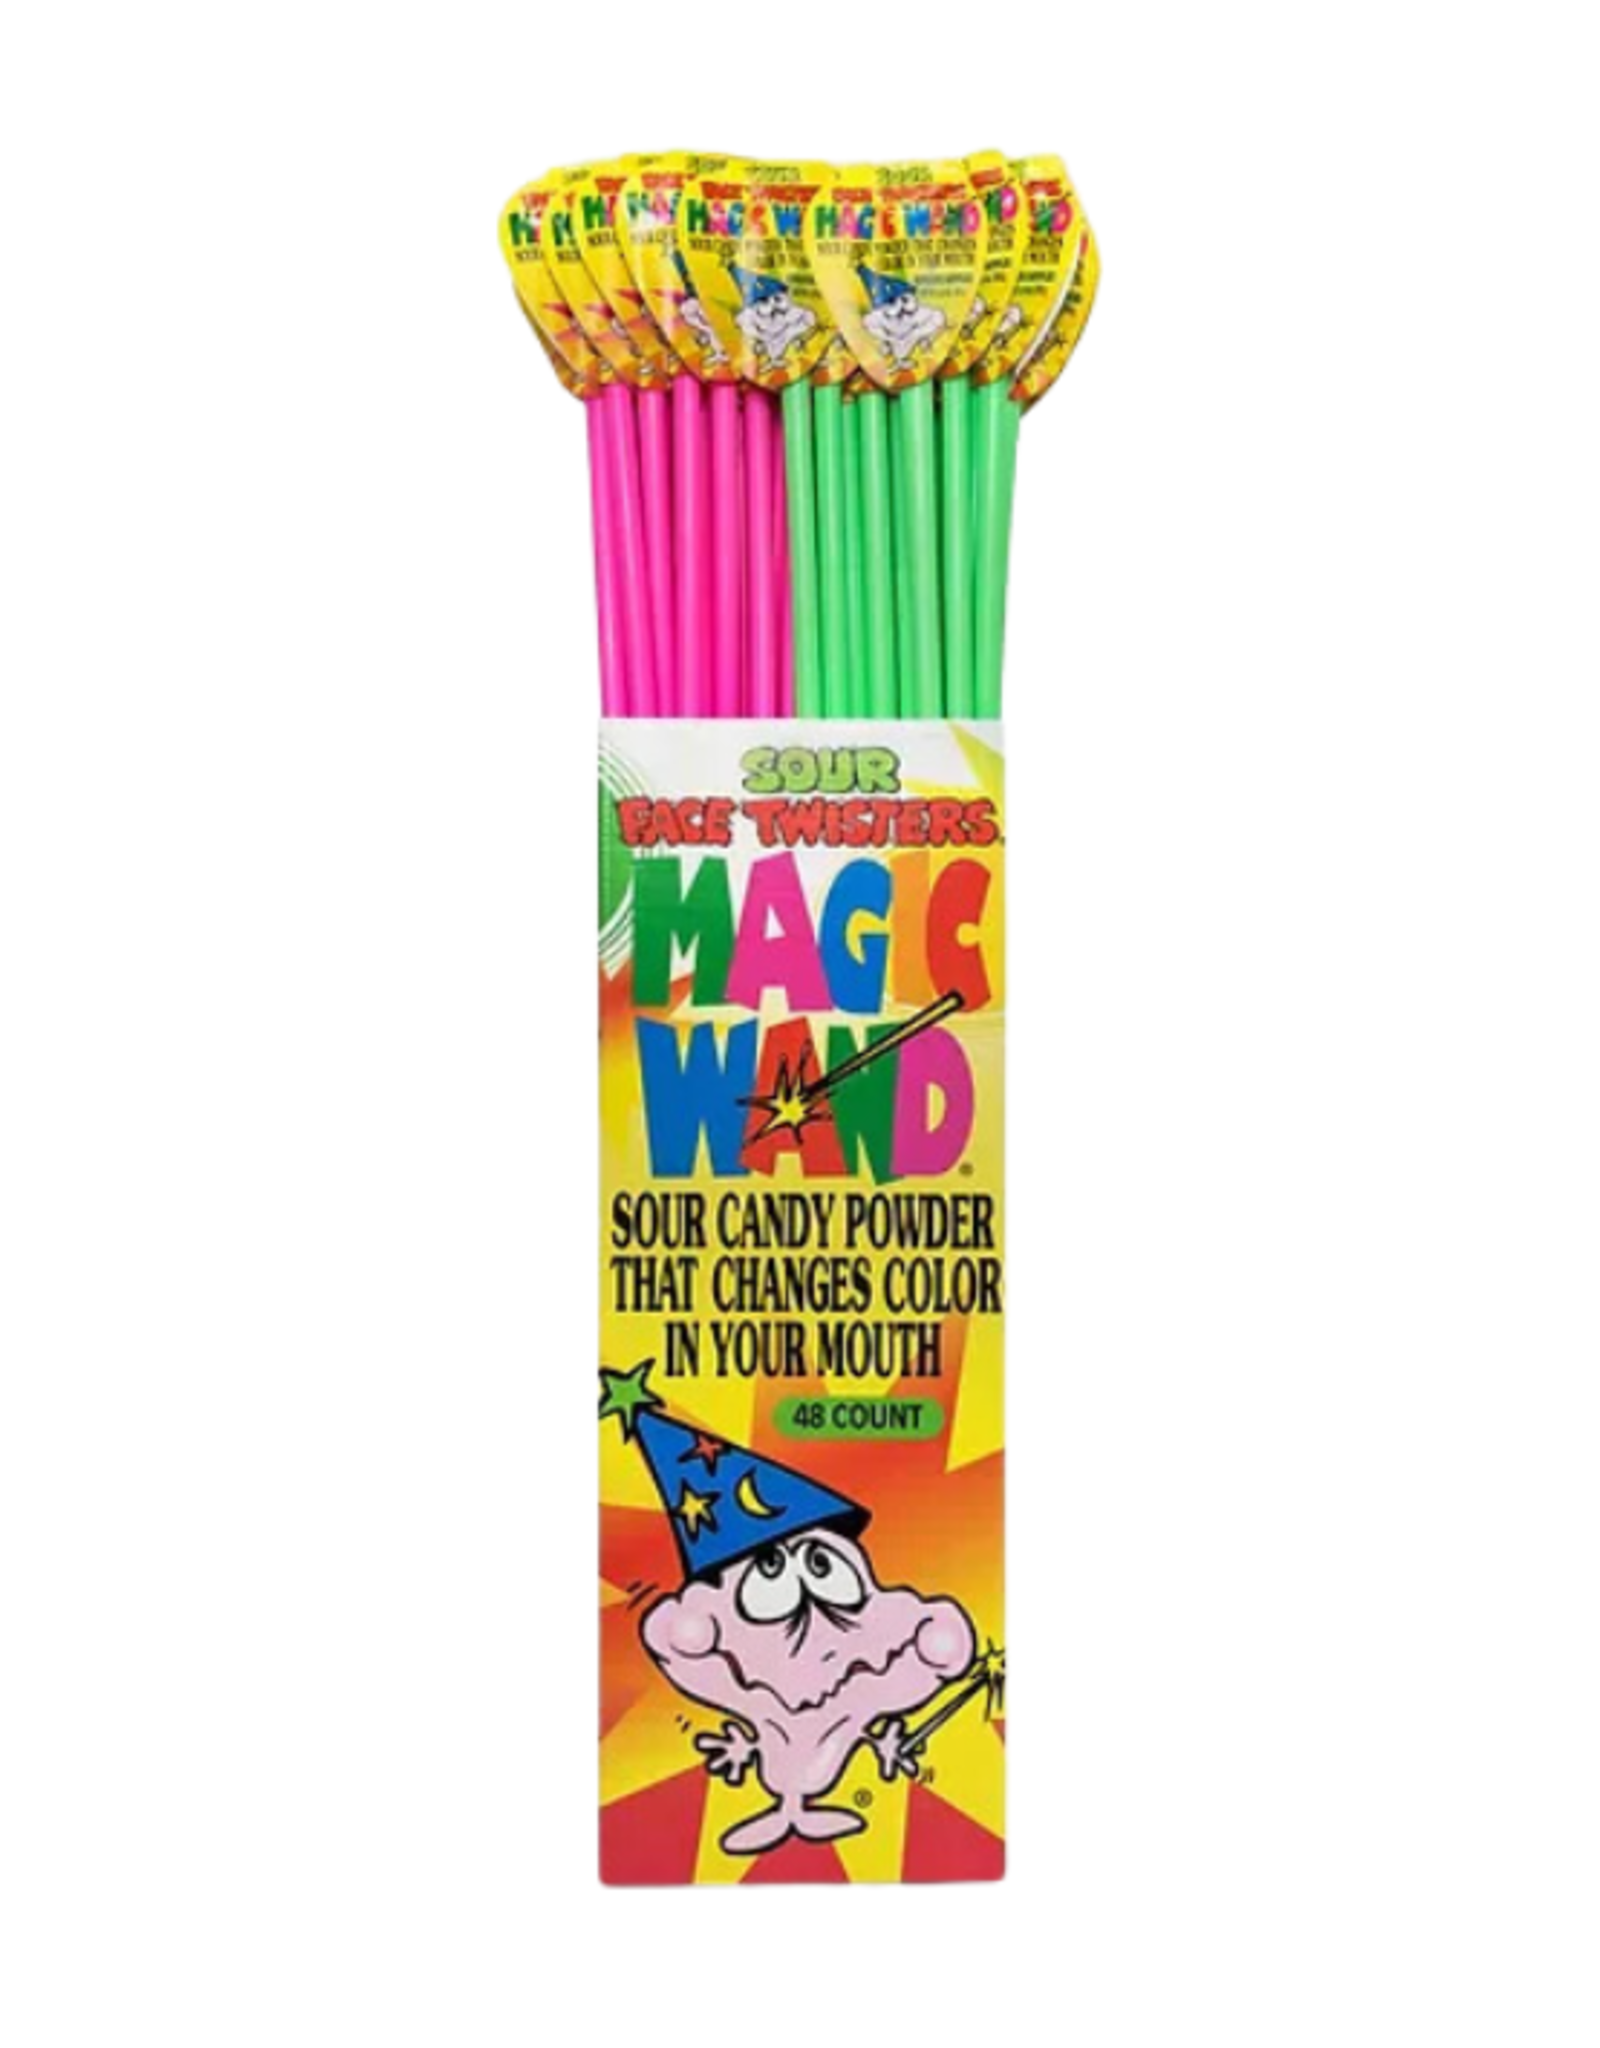 Jimmy Zee's Sour Face Twisters - Strawberry Magic Wand